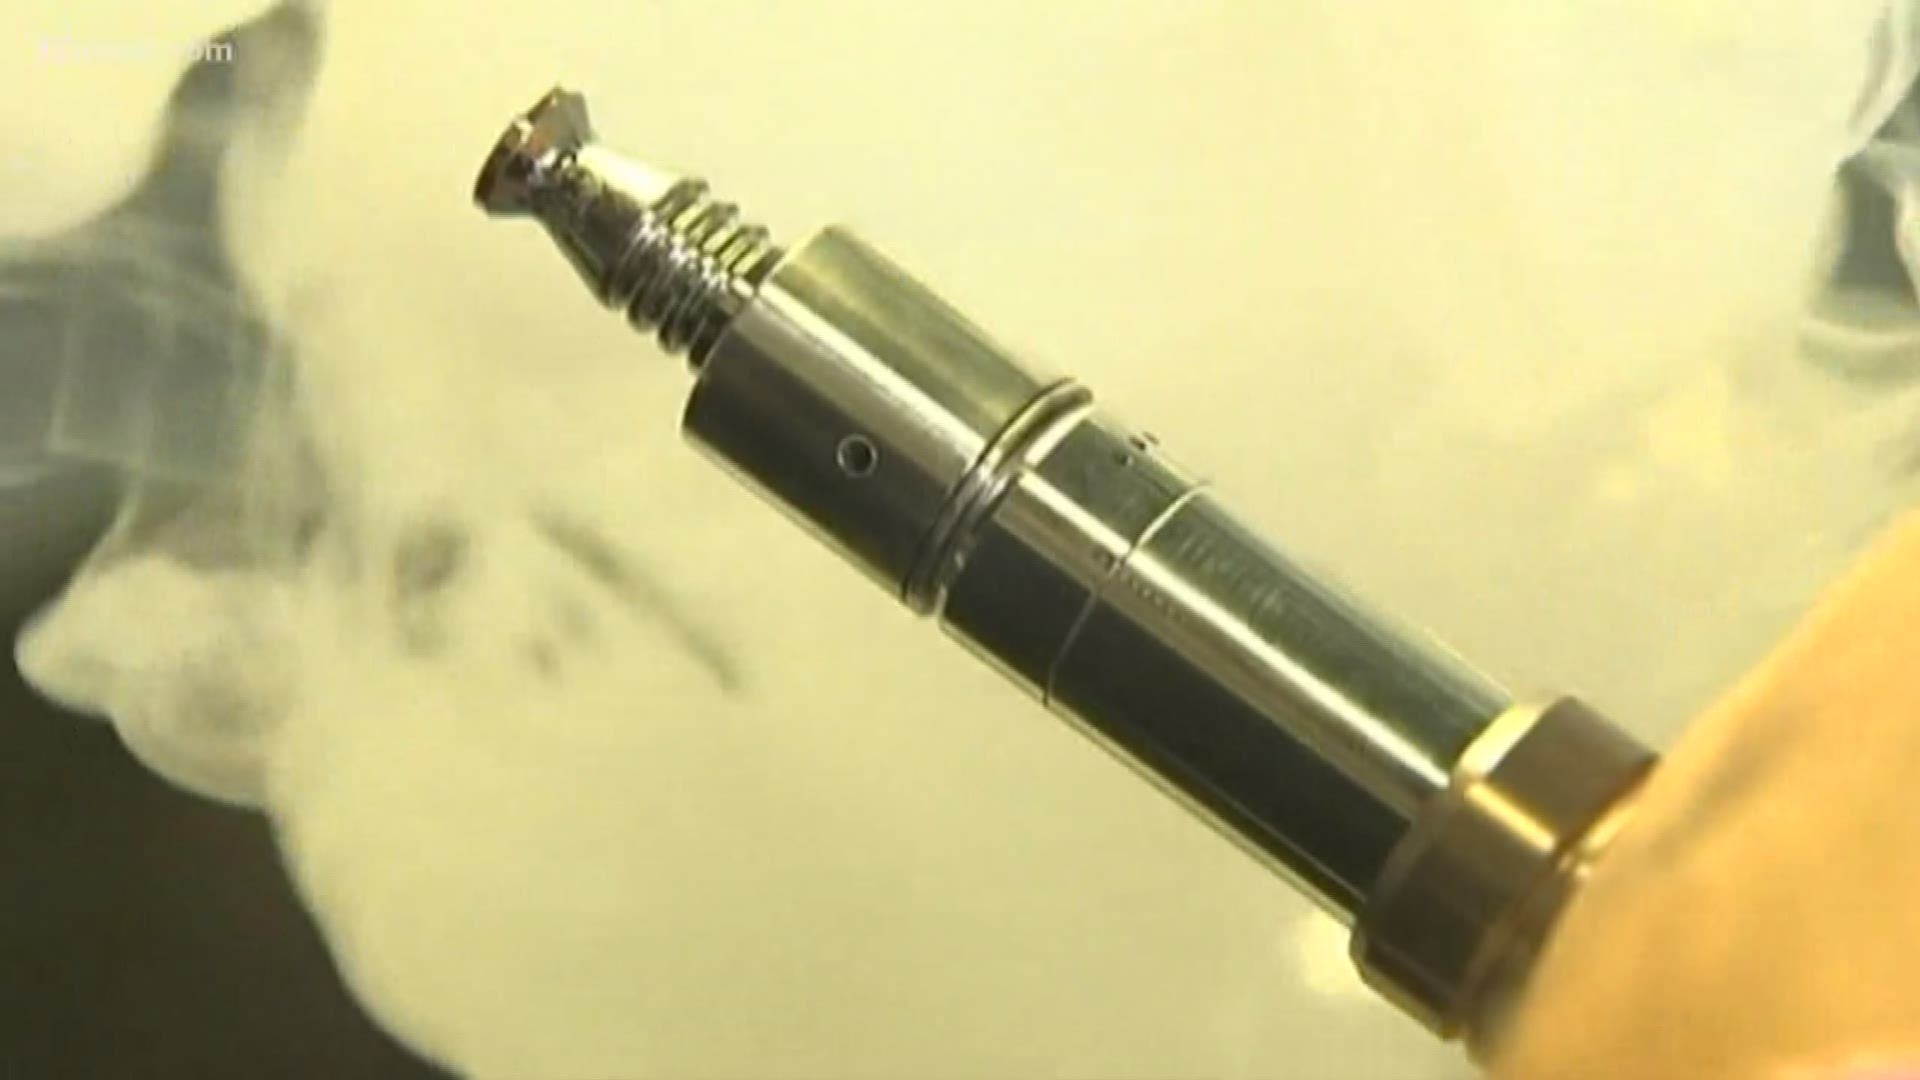 The City of Goodyear has taken a step toward combating the so-called vaping epidemic after the city council passed an ordinance Monday night.